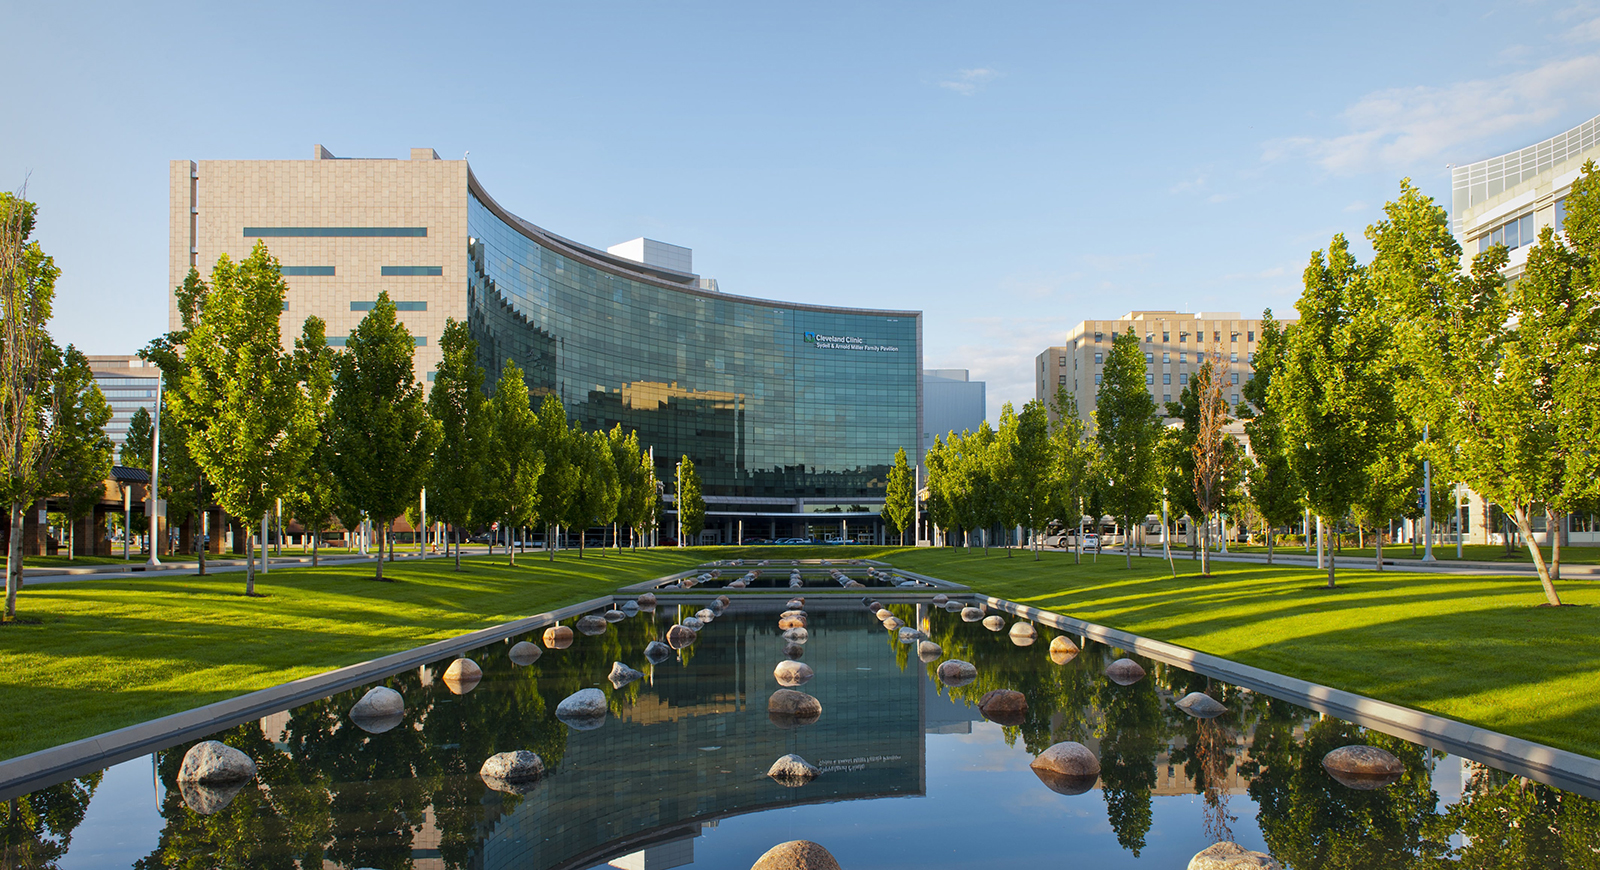 Exterior of class Cleveland Clinic building and its pond situated in a manicured green lawn.